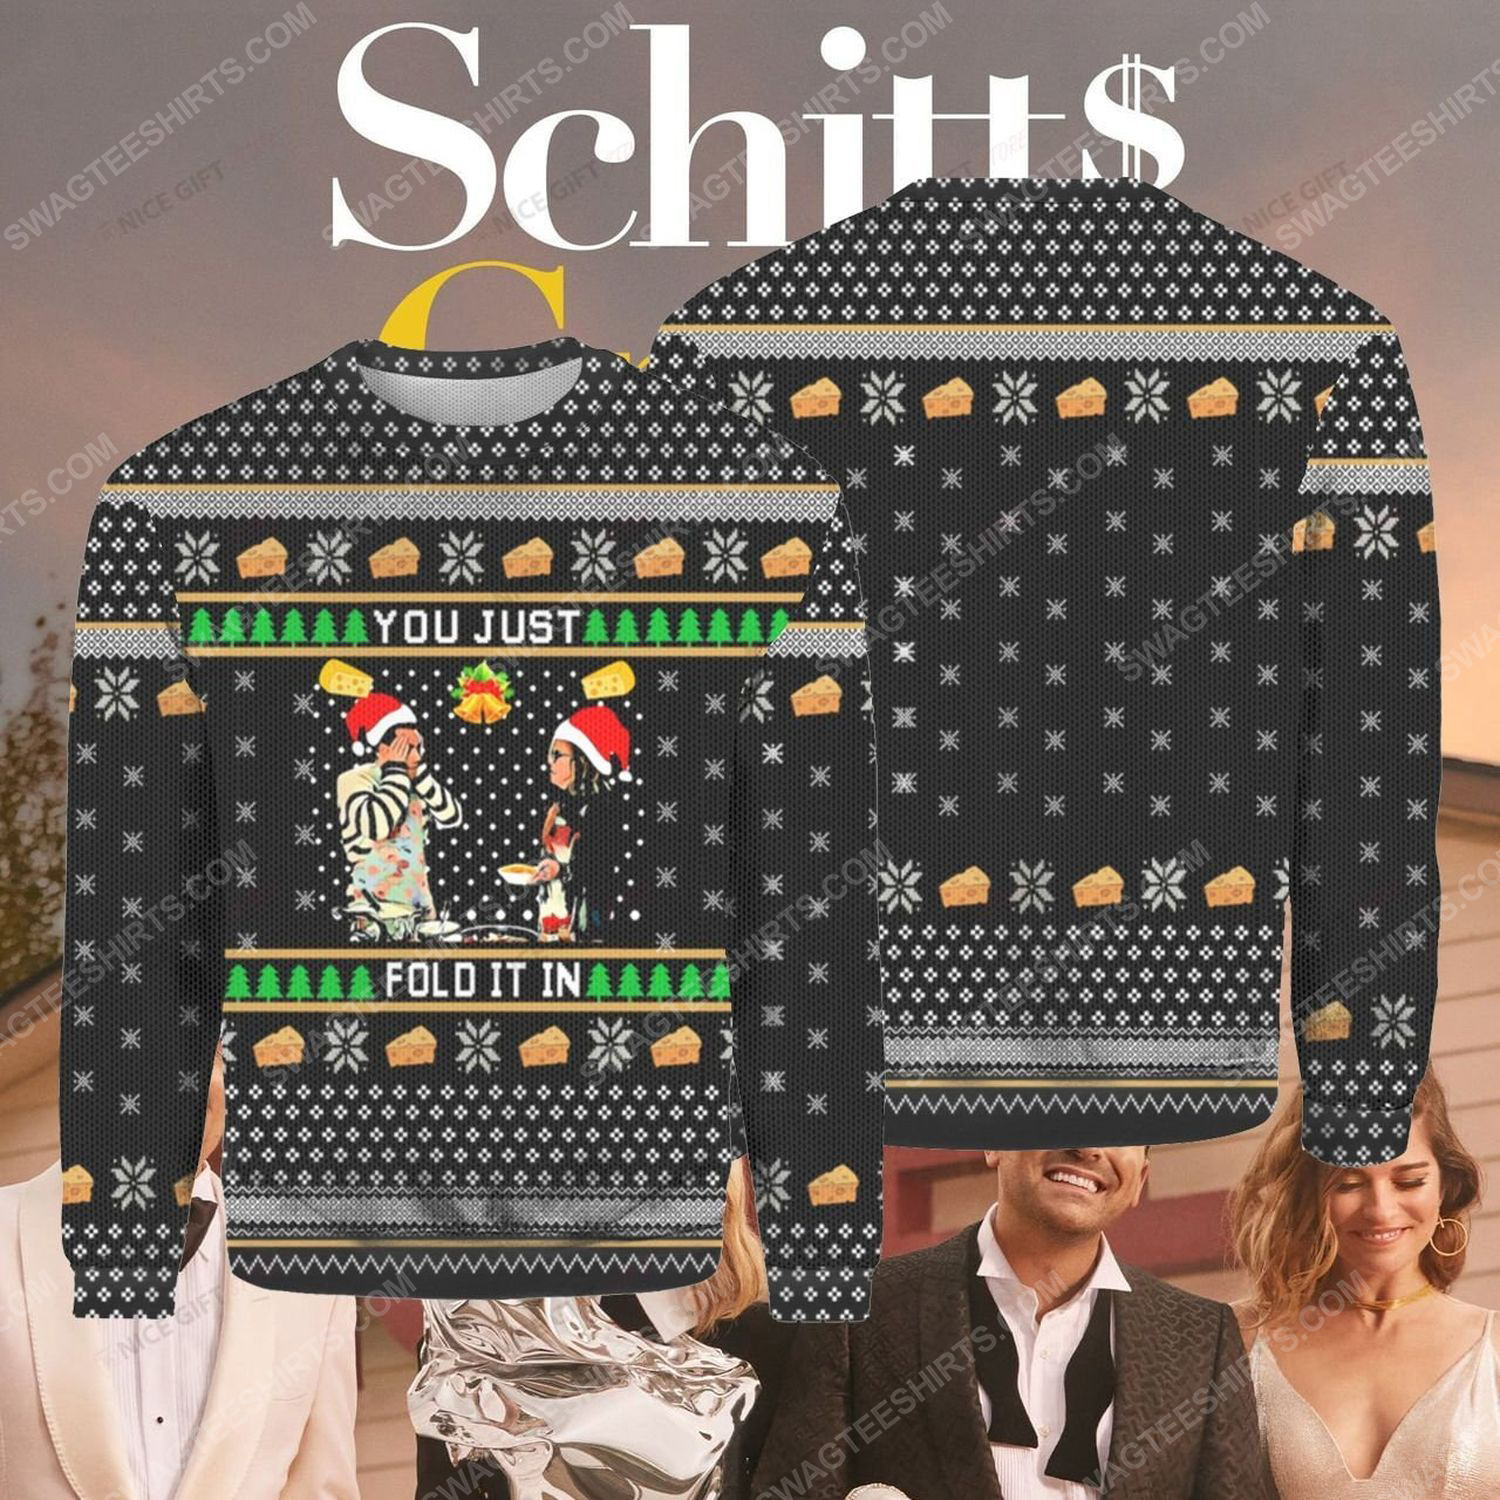 Schitt's creek you just fold it in ugly christmas sweater 1 - Copy (2)